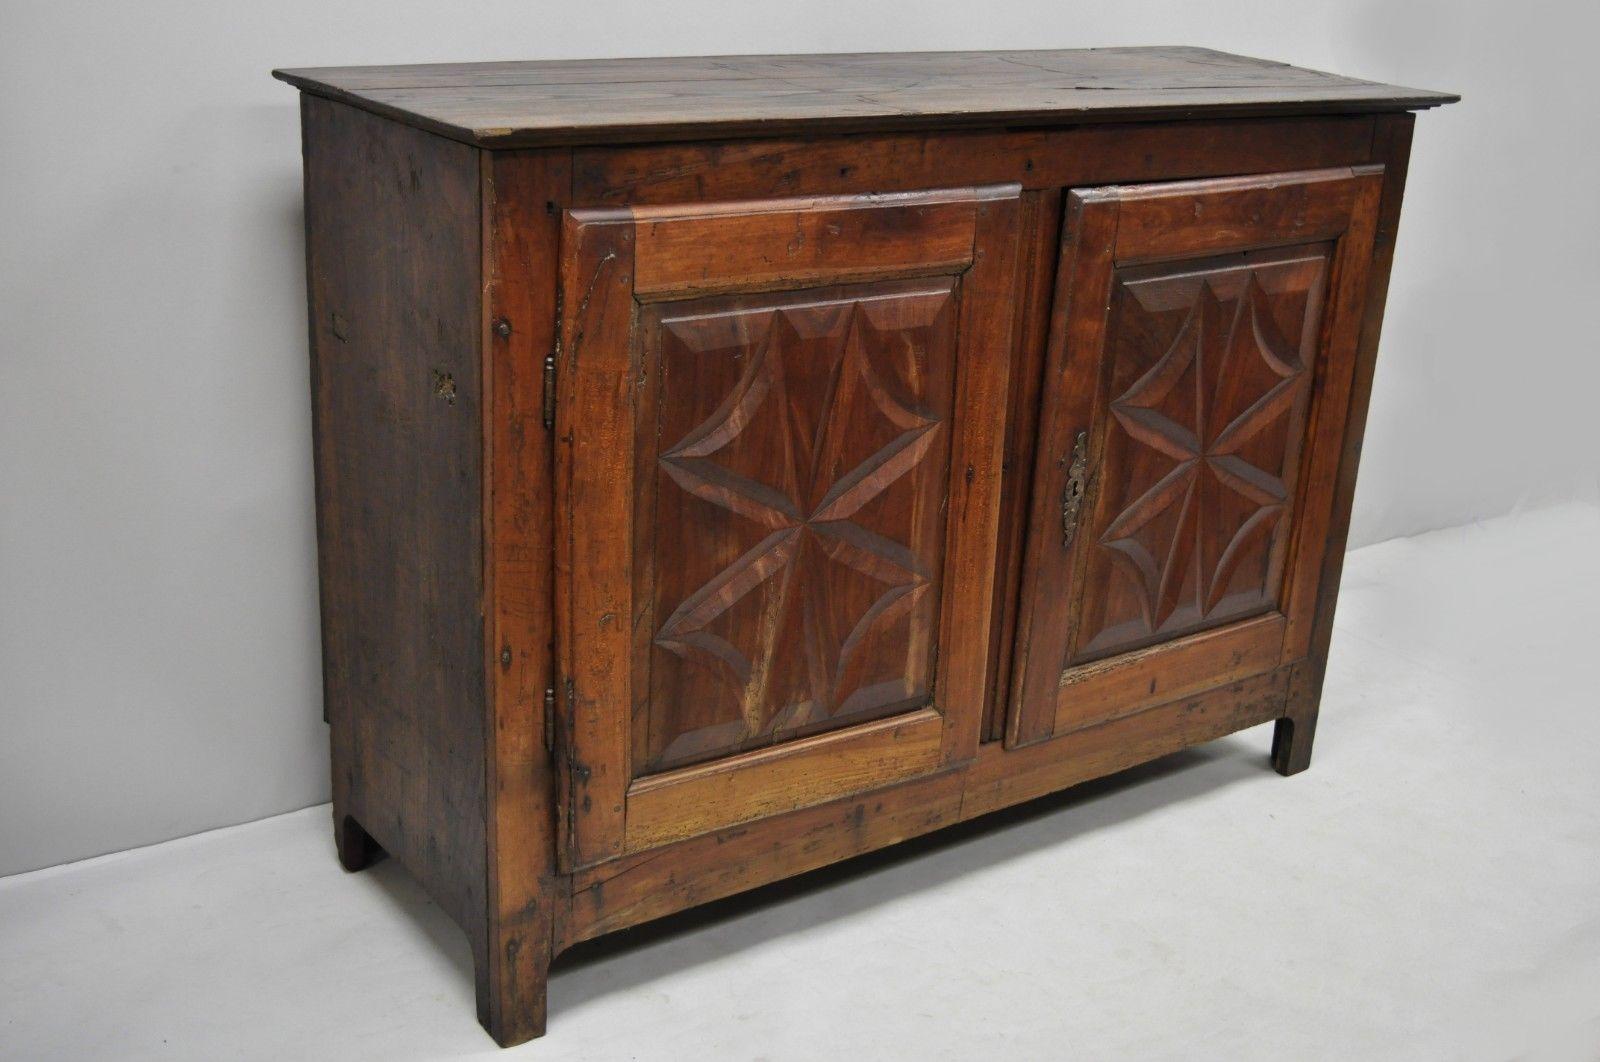 17th century carved walnut Italian Baroque two-door credenza cabinet buffet. Items features hand carved door panels, interior shelves, authentic aged and distressed patina, 2 swing doors, very nice antique item, circa 17th Century. Measurements: 40